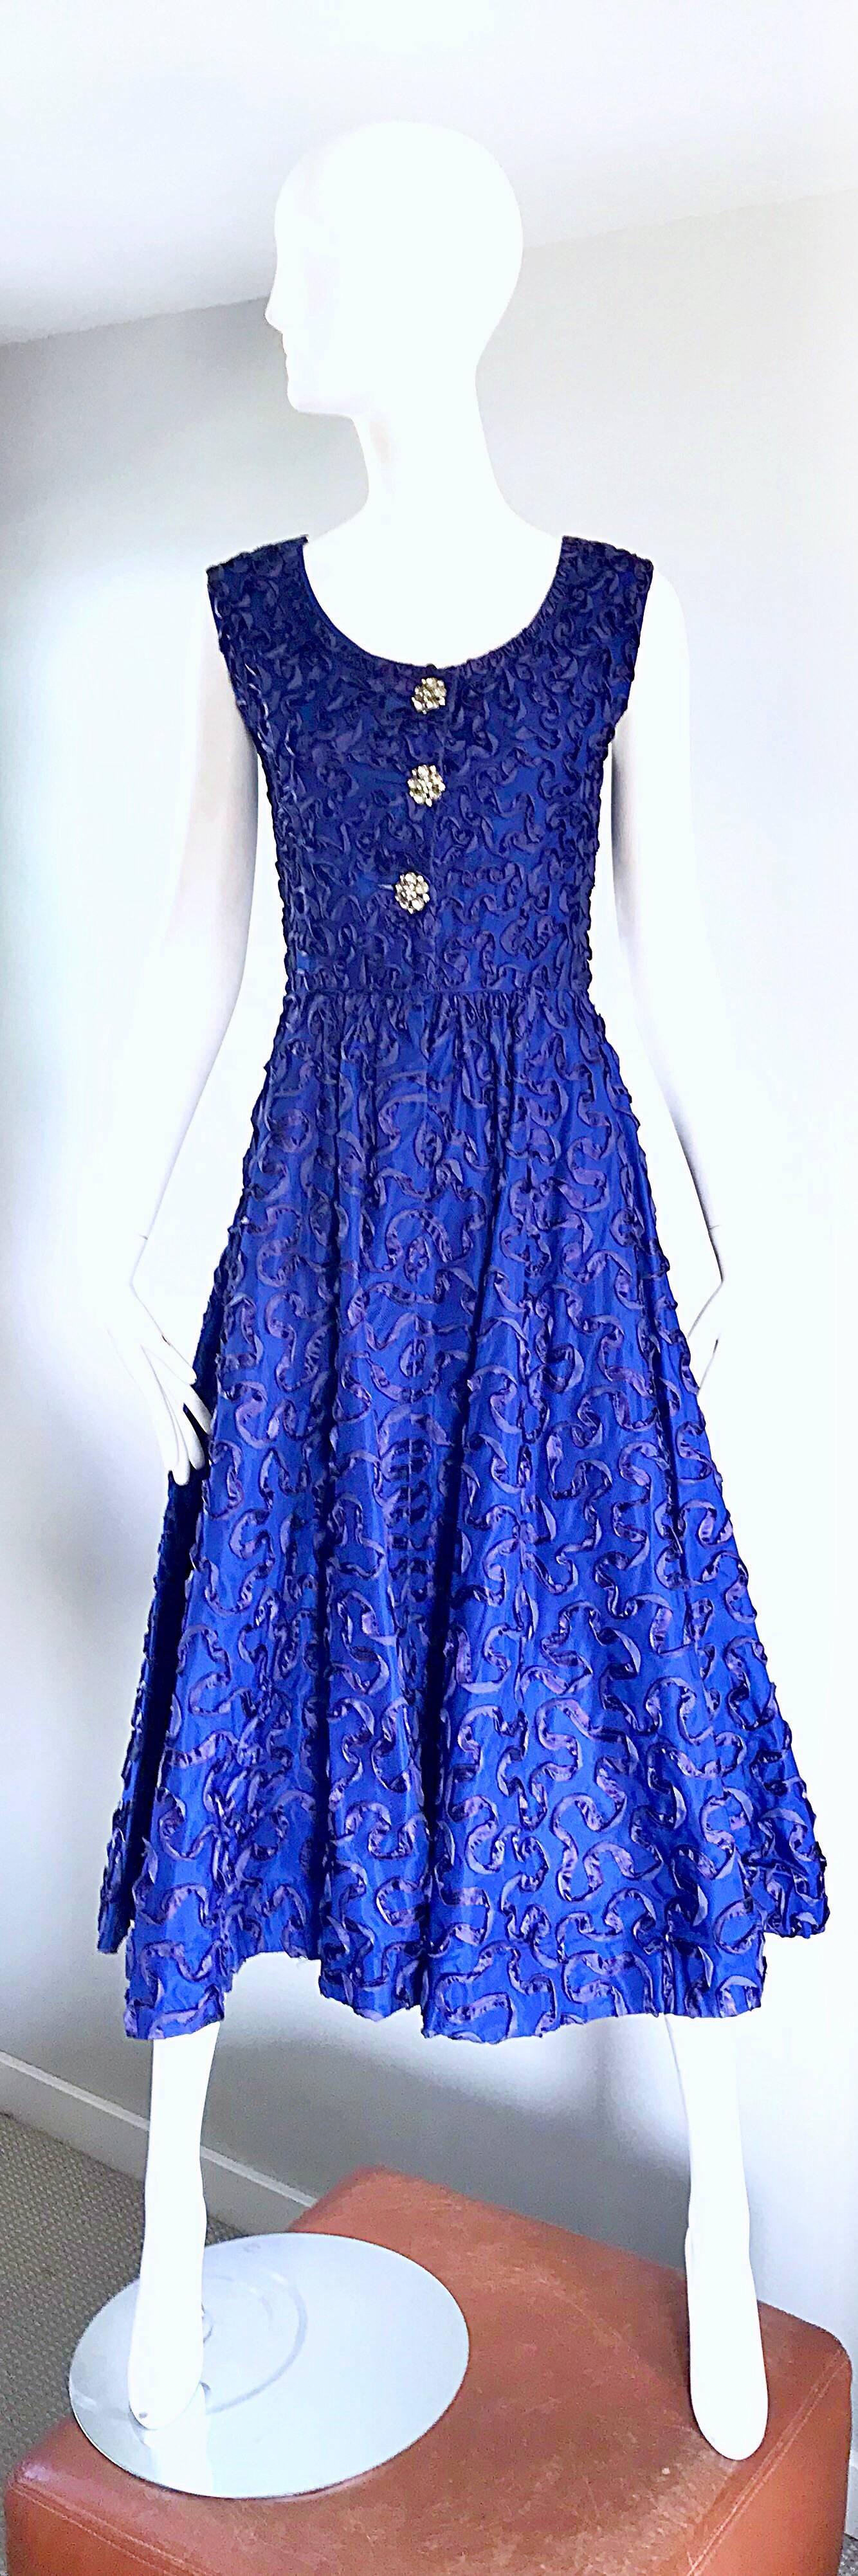 Beautiful 1950s Demi Couture Royal Blue Fit n' Flare Vintage 50s Ribbon Dress 2